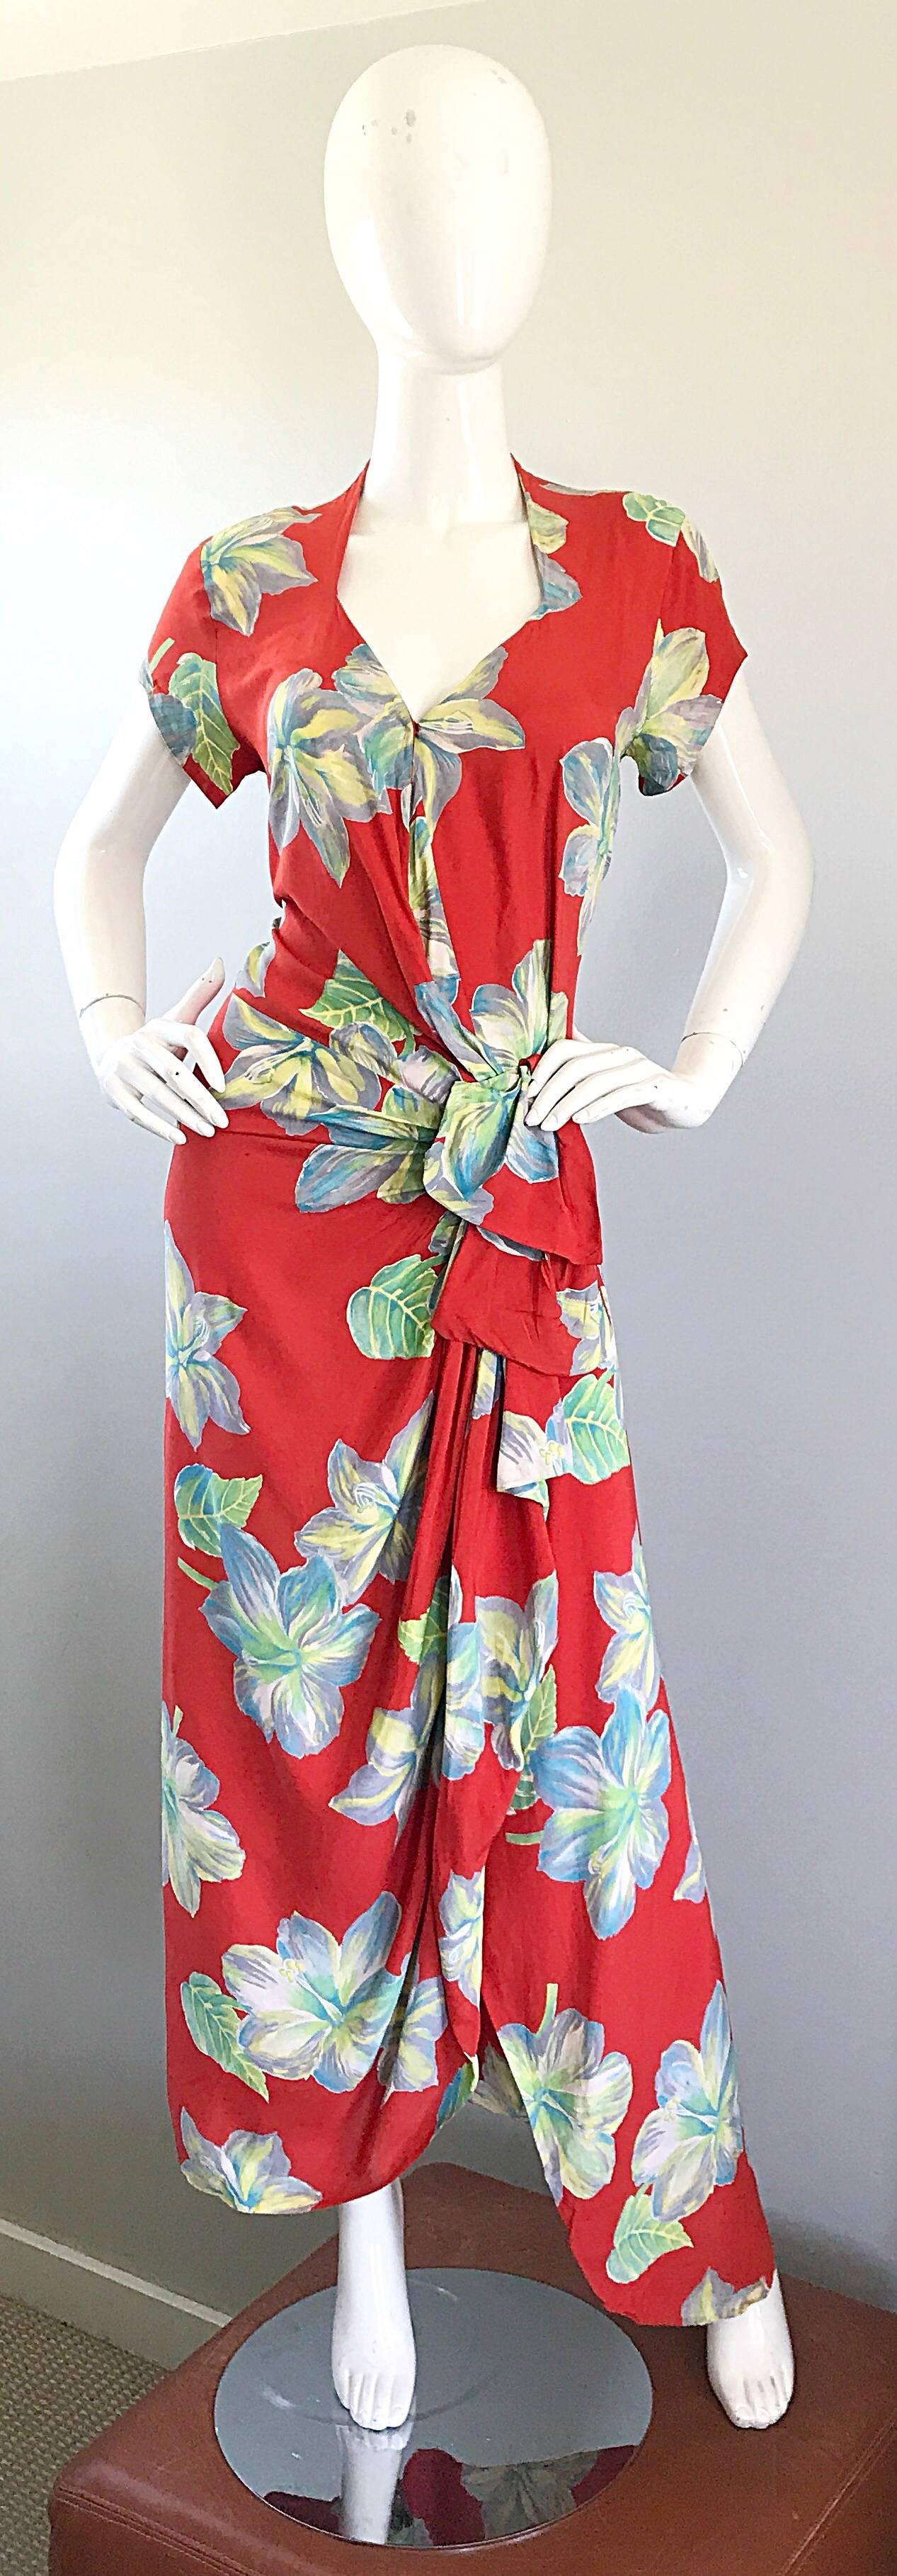 Gorgeous 1930s cold silk couture Hawaiian full length dress! Drapes over the body beautifully. Wrap style with interior hook-and-eye closure at the waist. Vibrant burnt orange color with large flowers printed throughout in white, blue, green and